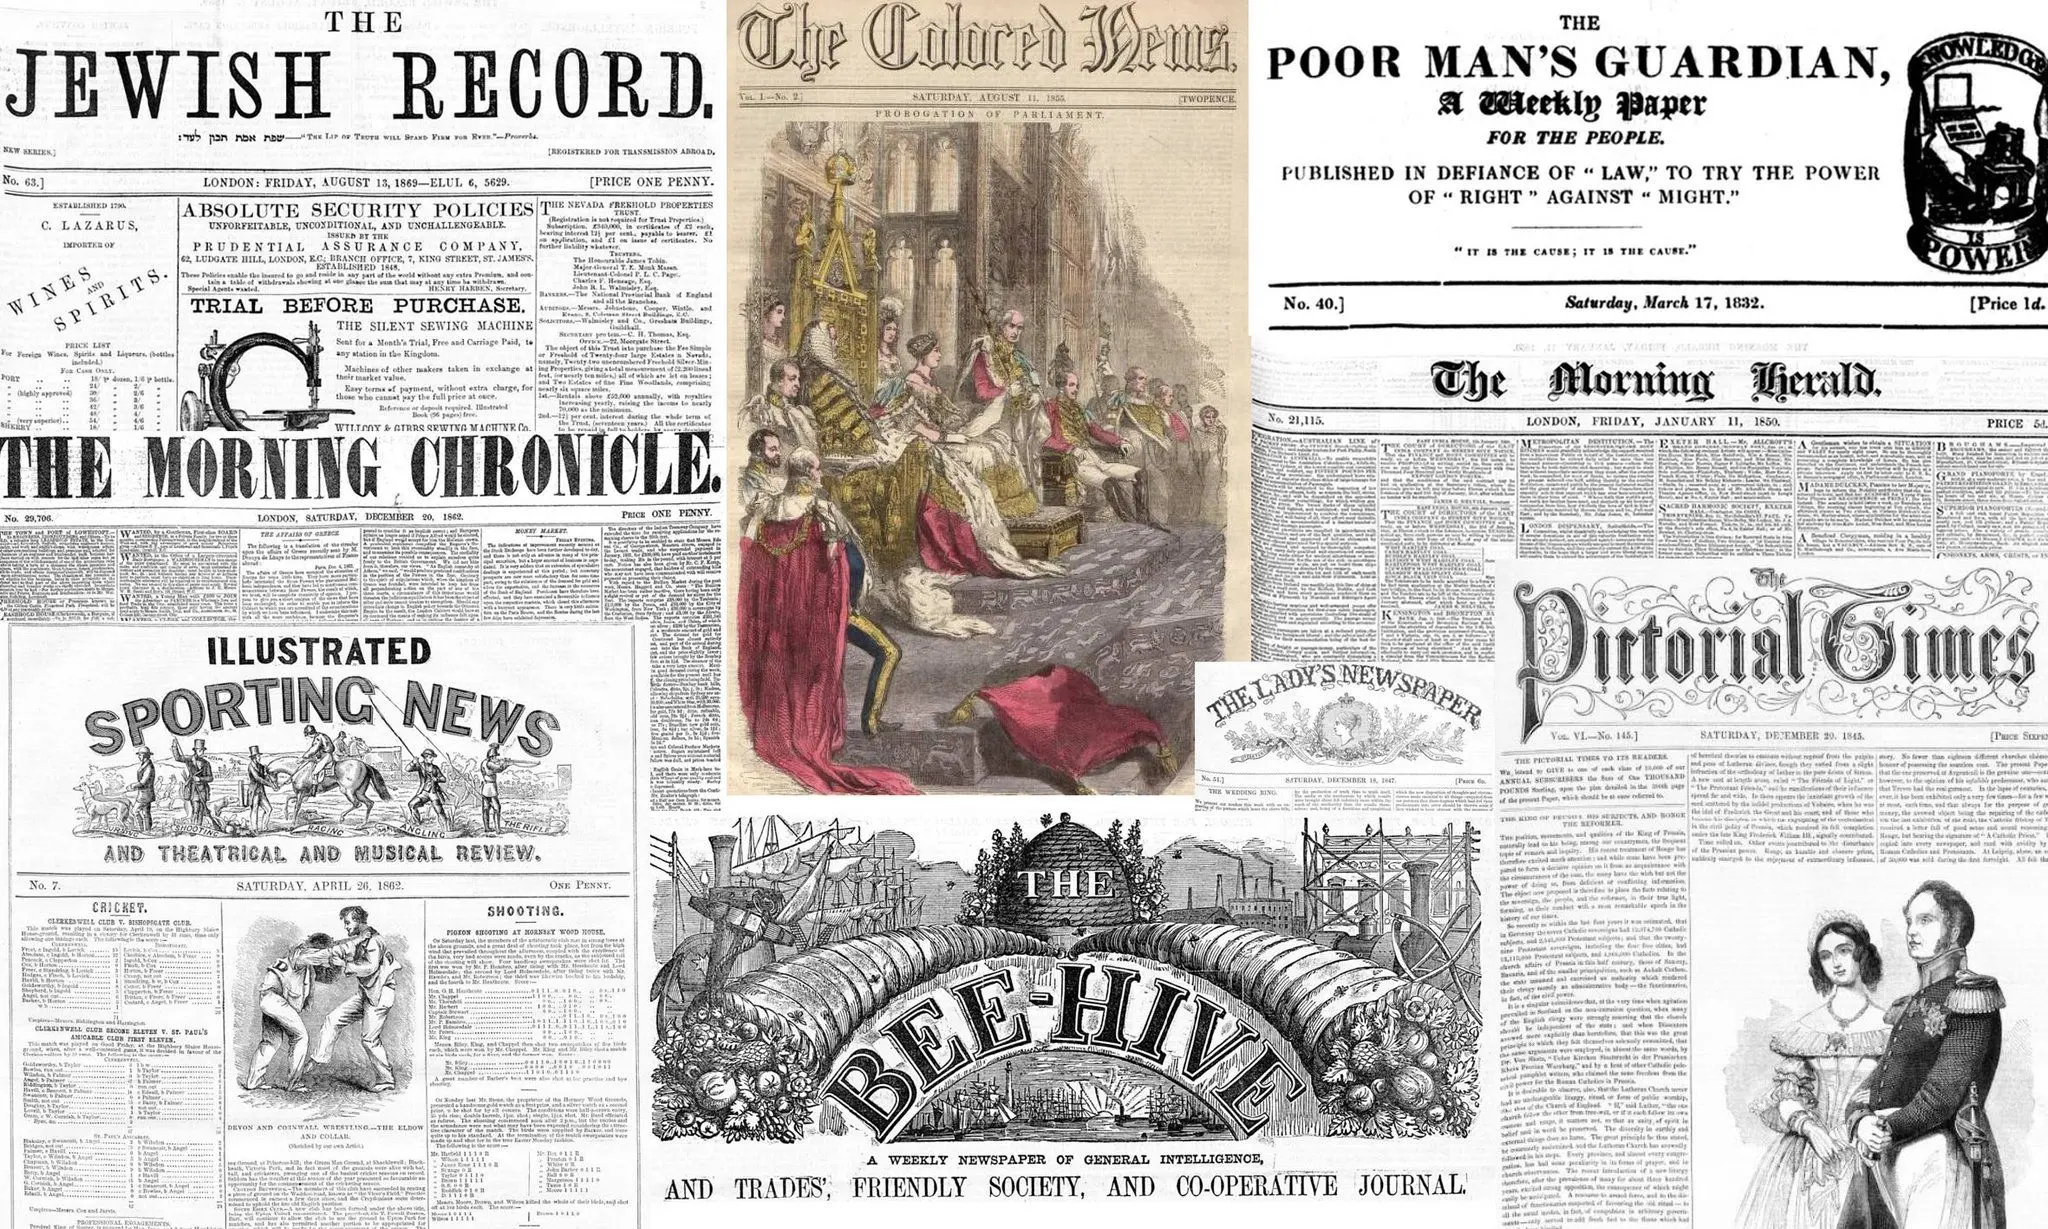 Explore Over One Million Historical Newspaper Pages for FREE